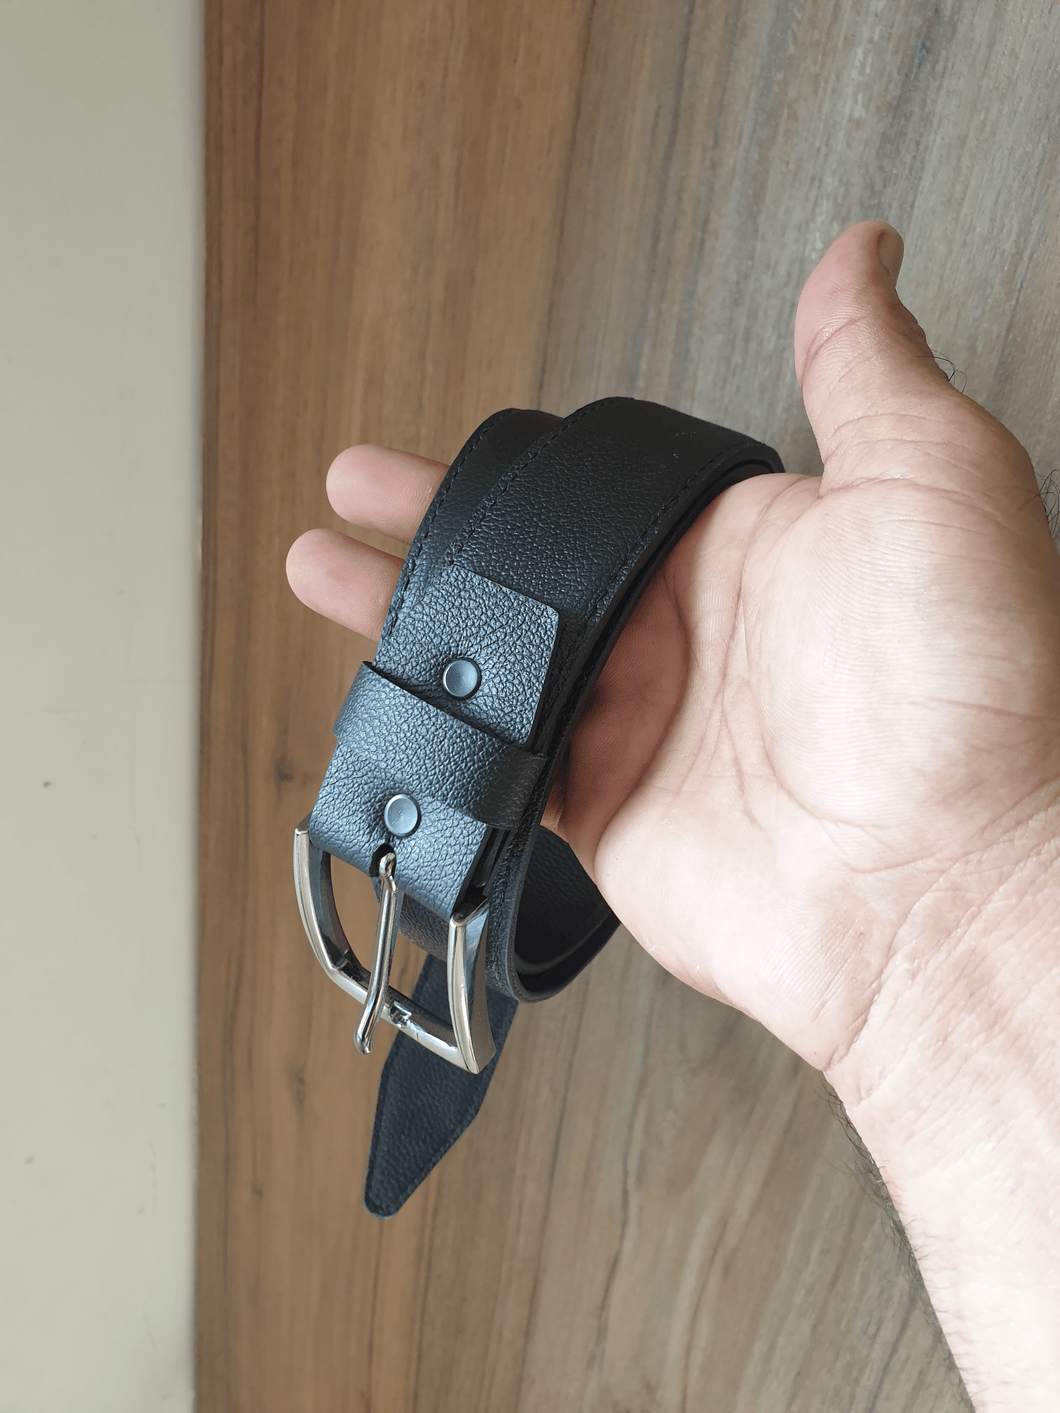 Indianleathercraft 32 - 36 inches Handmade leather formal belt